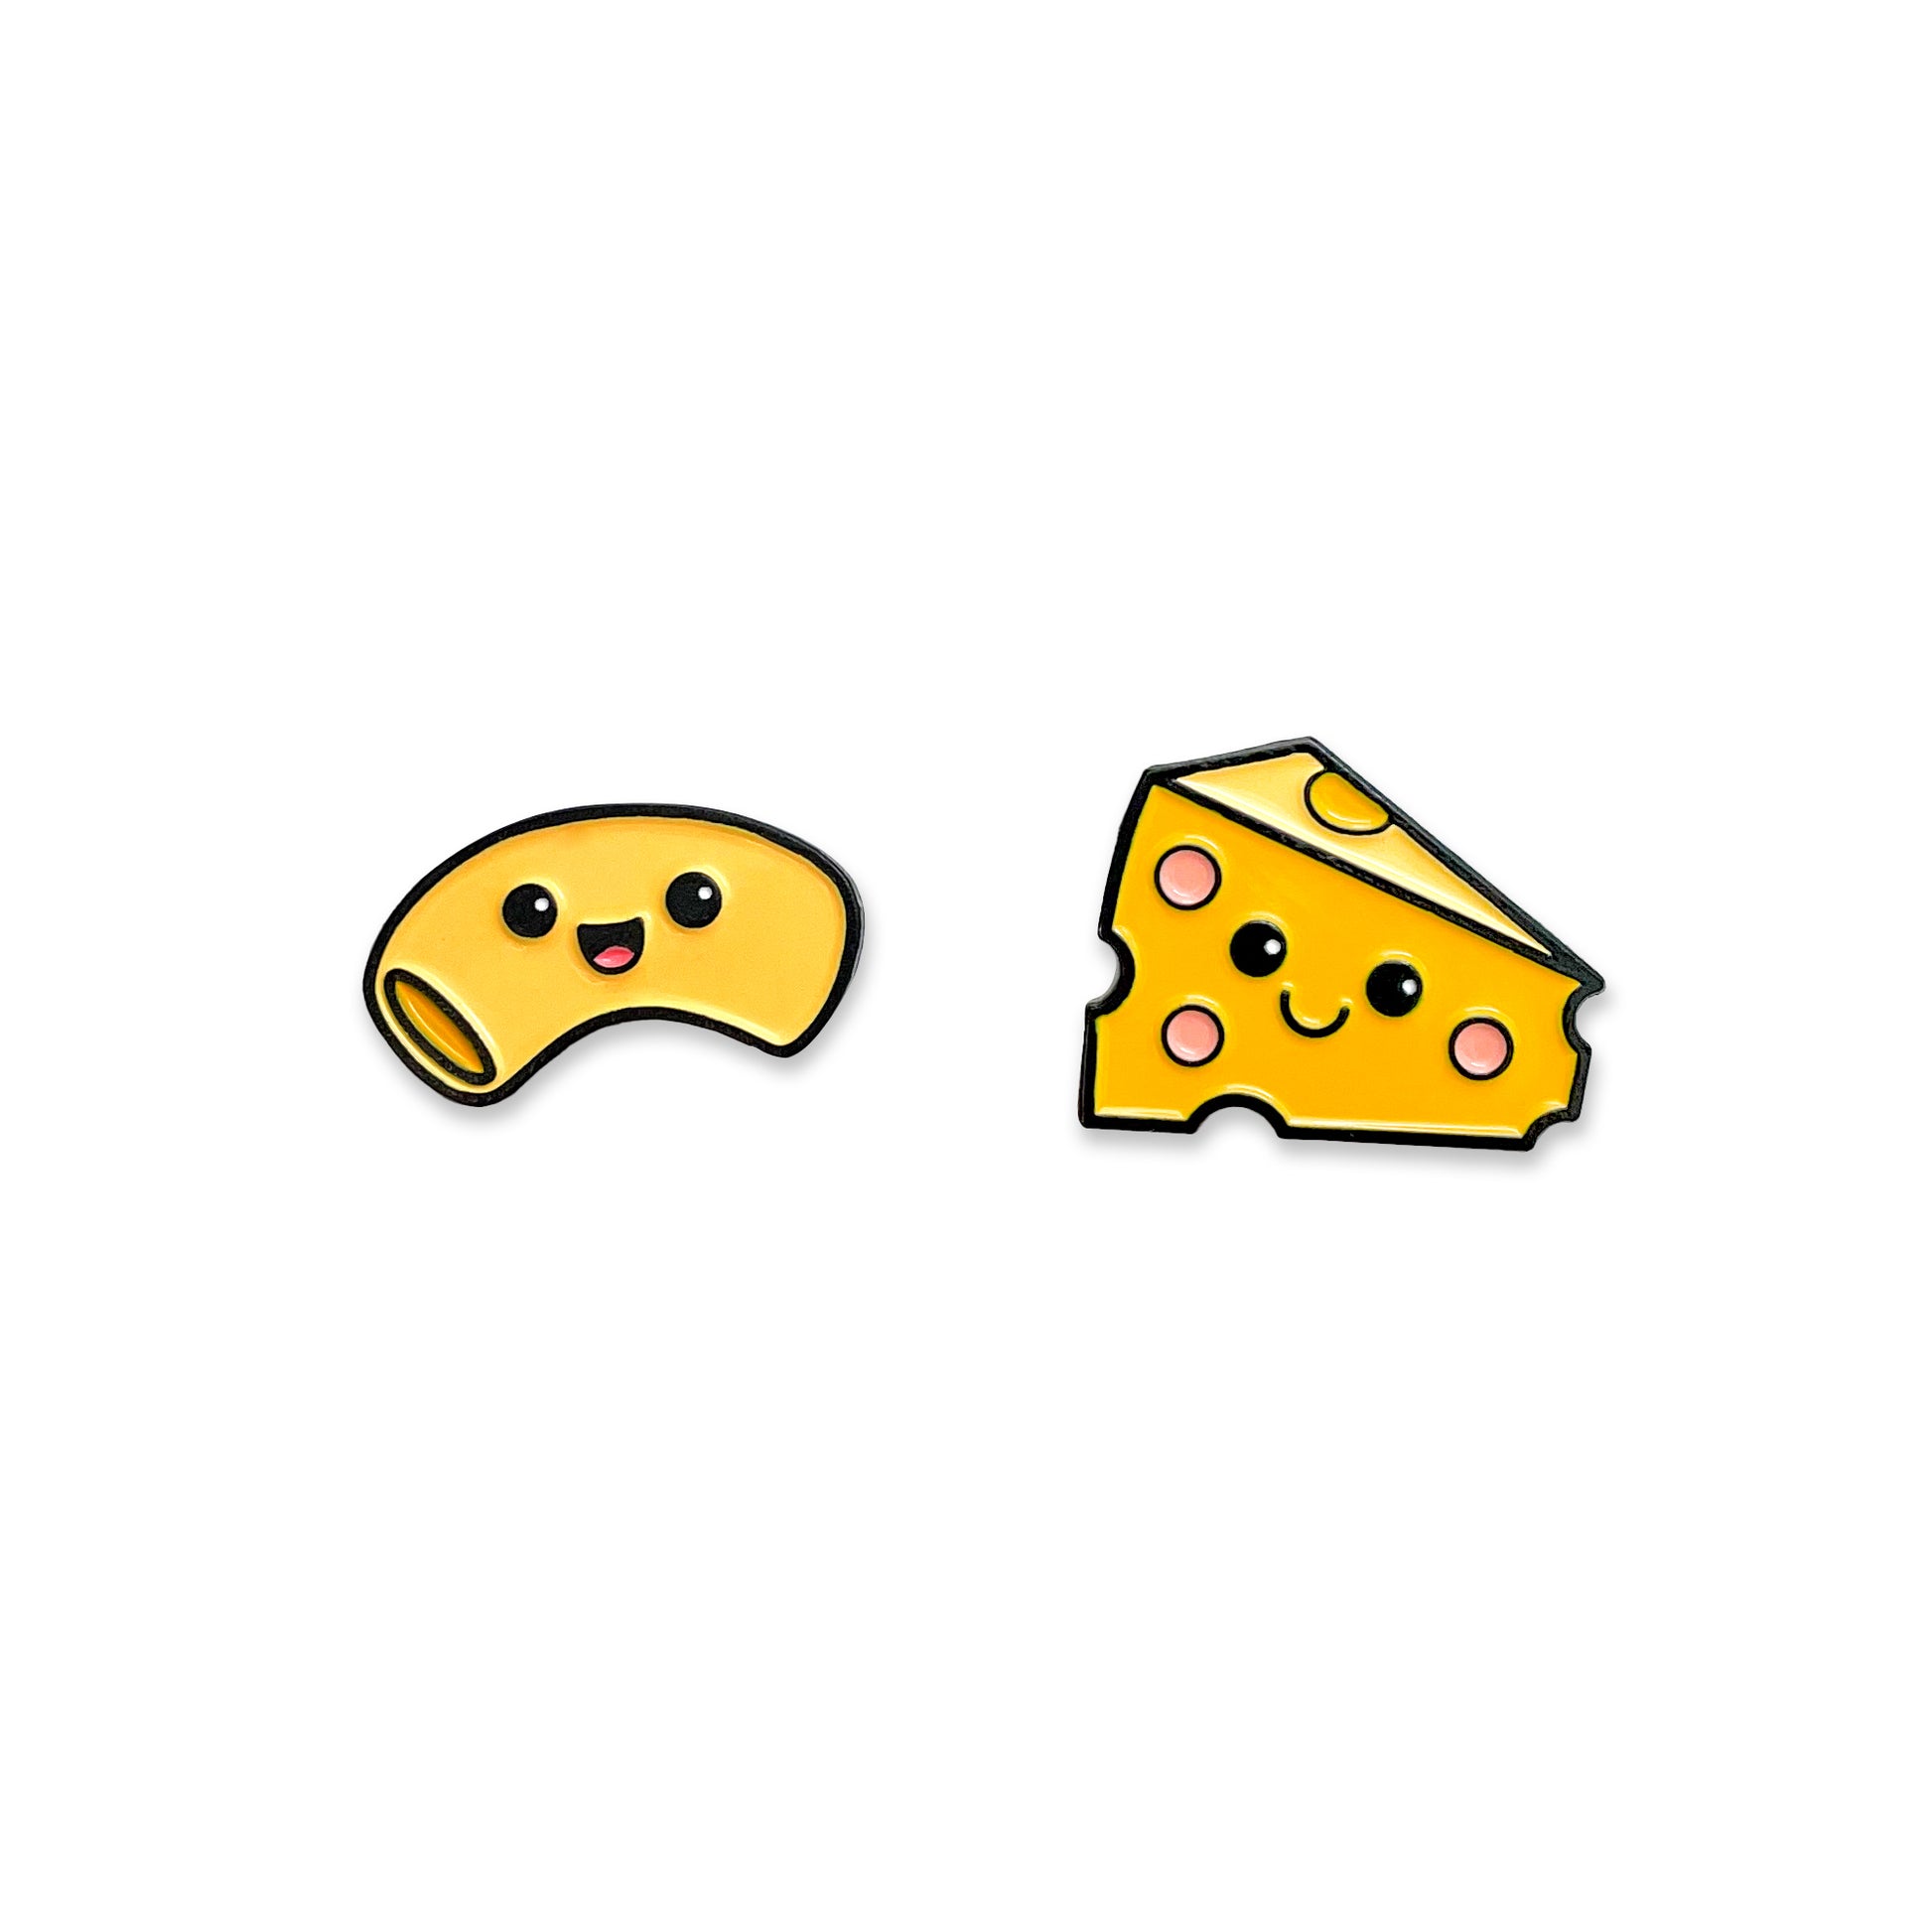 Mac and Cheese enamel pins on white background